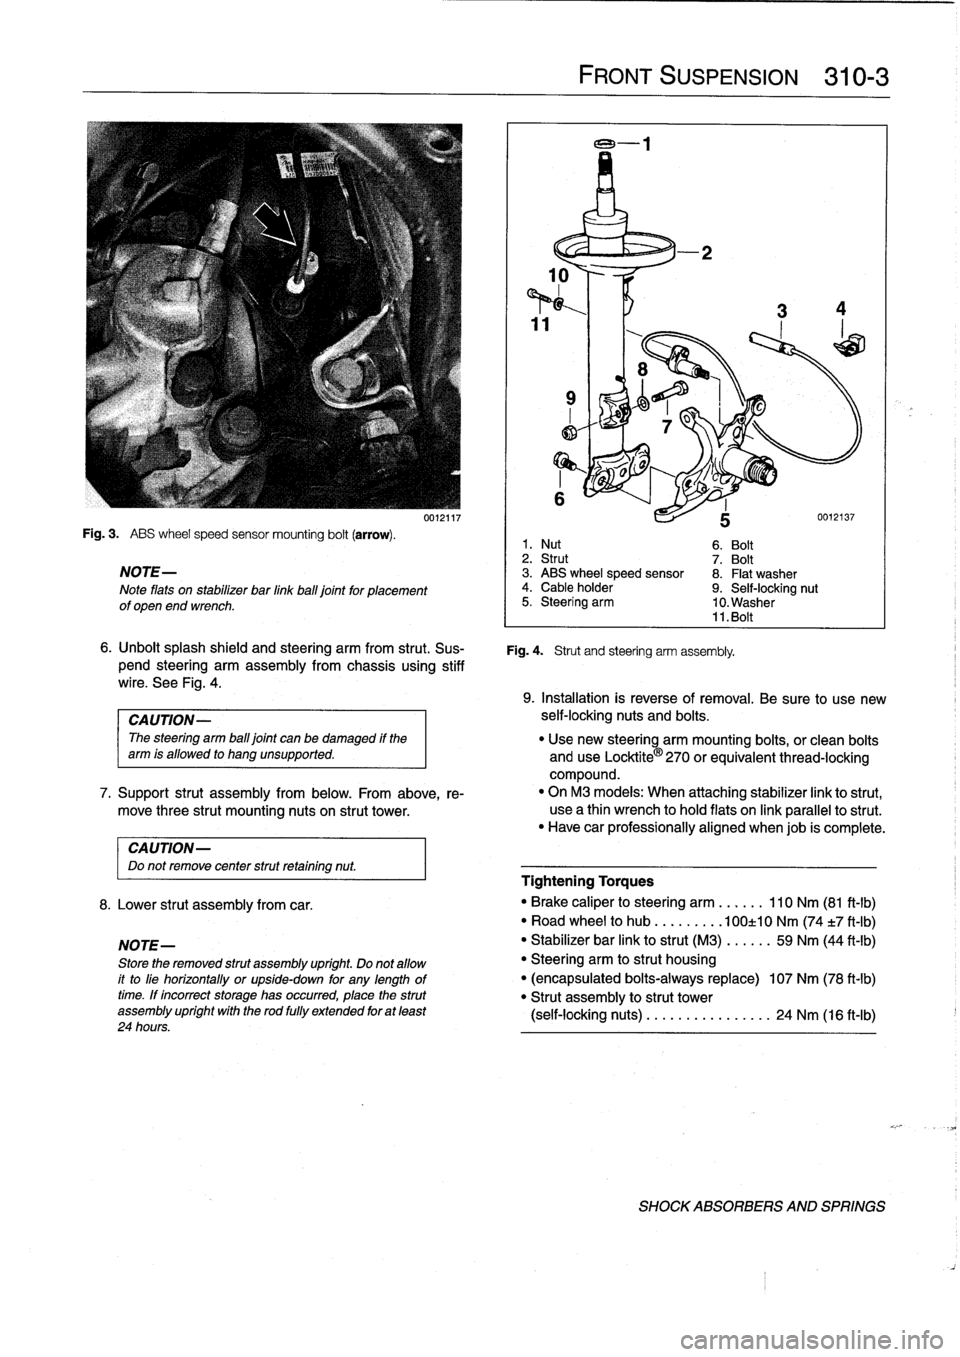 BMW 318i 1998 E36 Owners Manual 
Fig
.
3
.

	

ABS
wheel
speed
sensor
mounting
bolt
(arrow)
.

NOTE-

Note
flats
on
stabilizer
bar
linkball
joint
for
placement
of
open
end
wrench
.

CAUTION-
Do
not
remove
center
strut
retaining
nut
